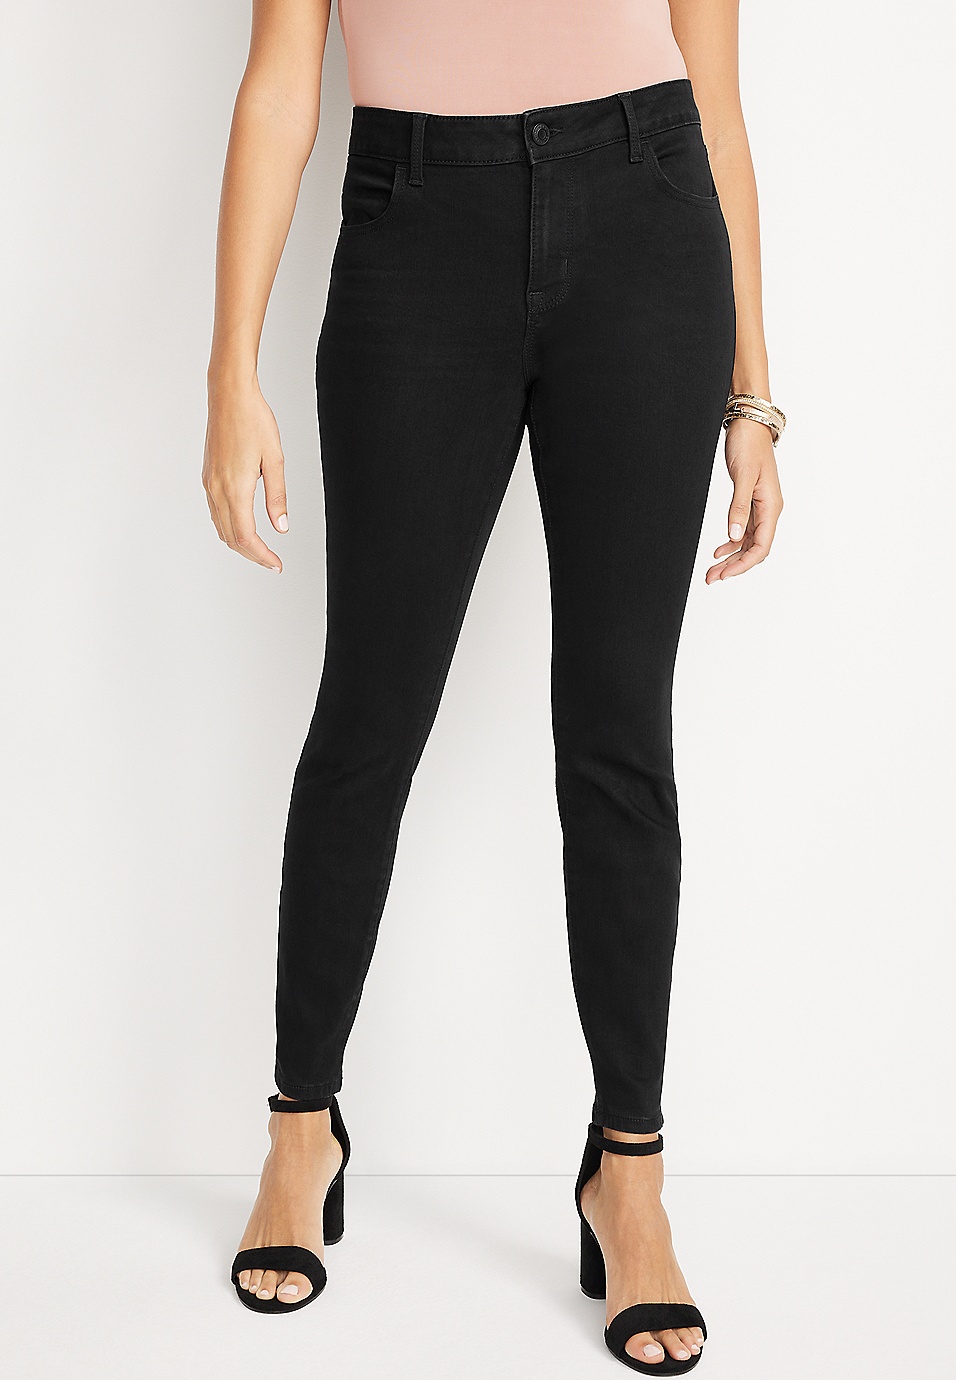 m jeans by maurices™ Mid Fit Mid Rise Jegging | maurices